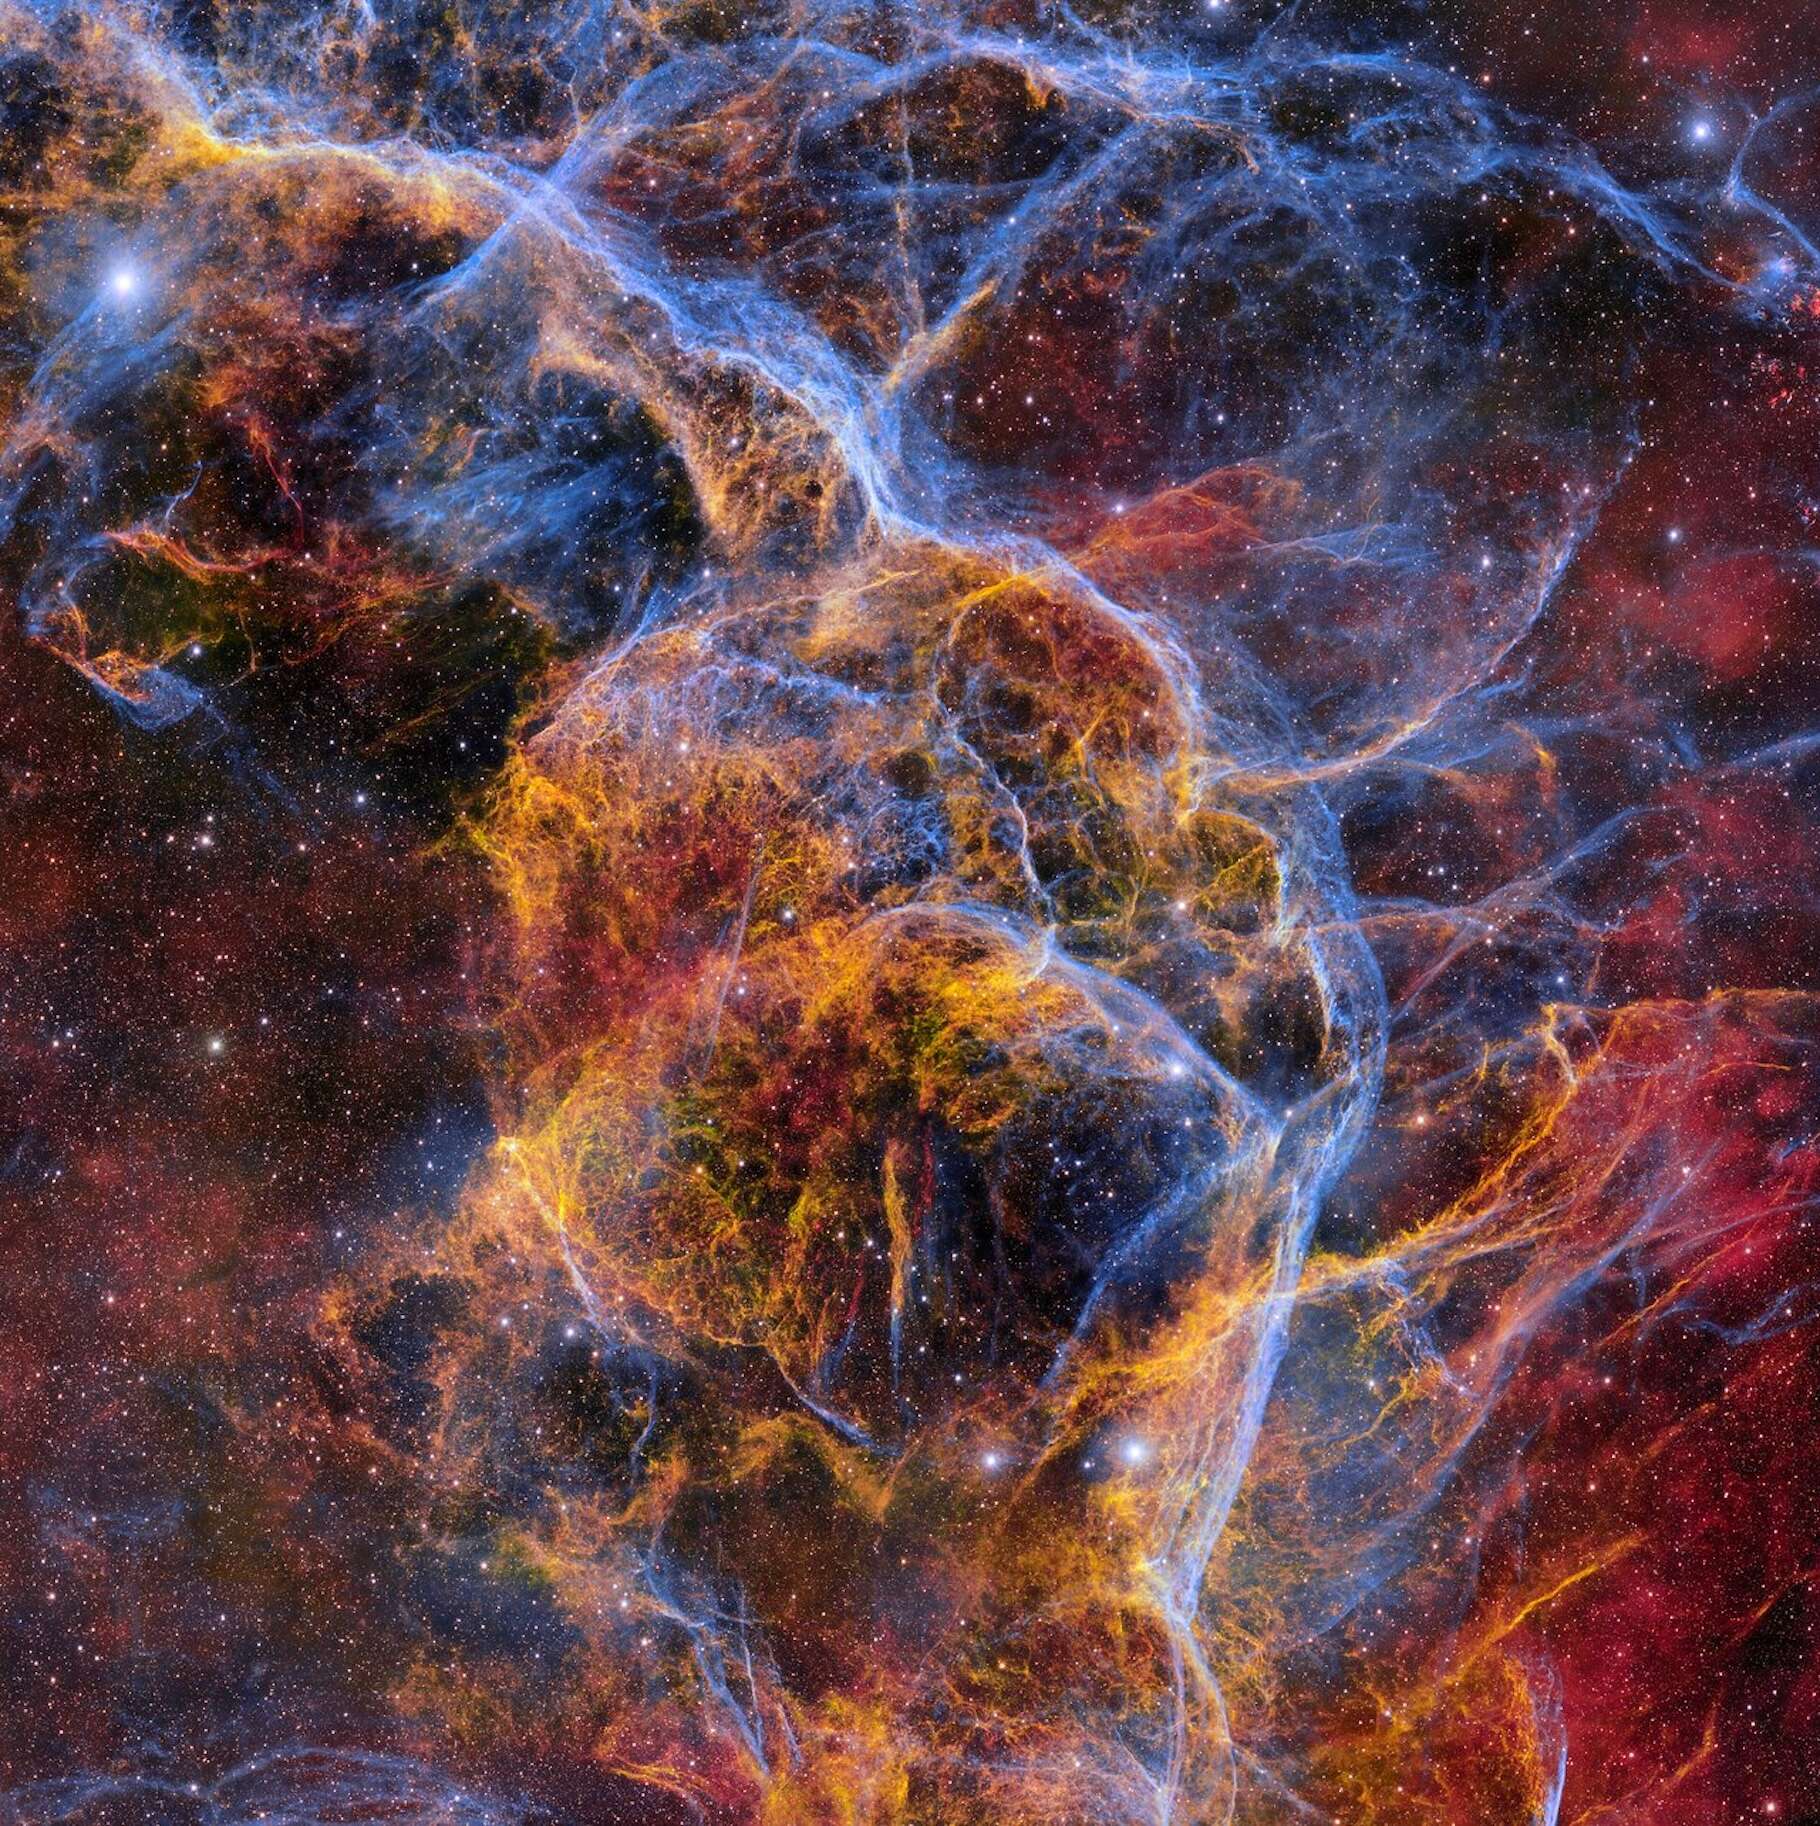 A wonderful picture of the remains of a star that exploded a few thousand years ago!